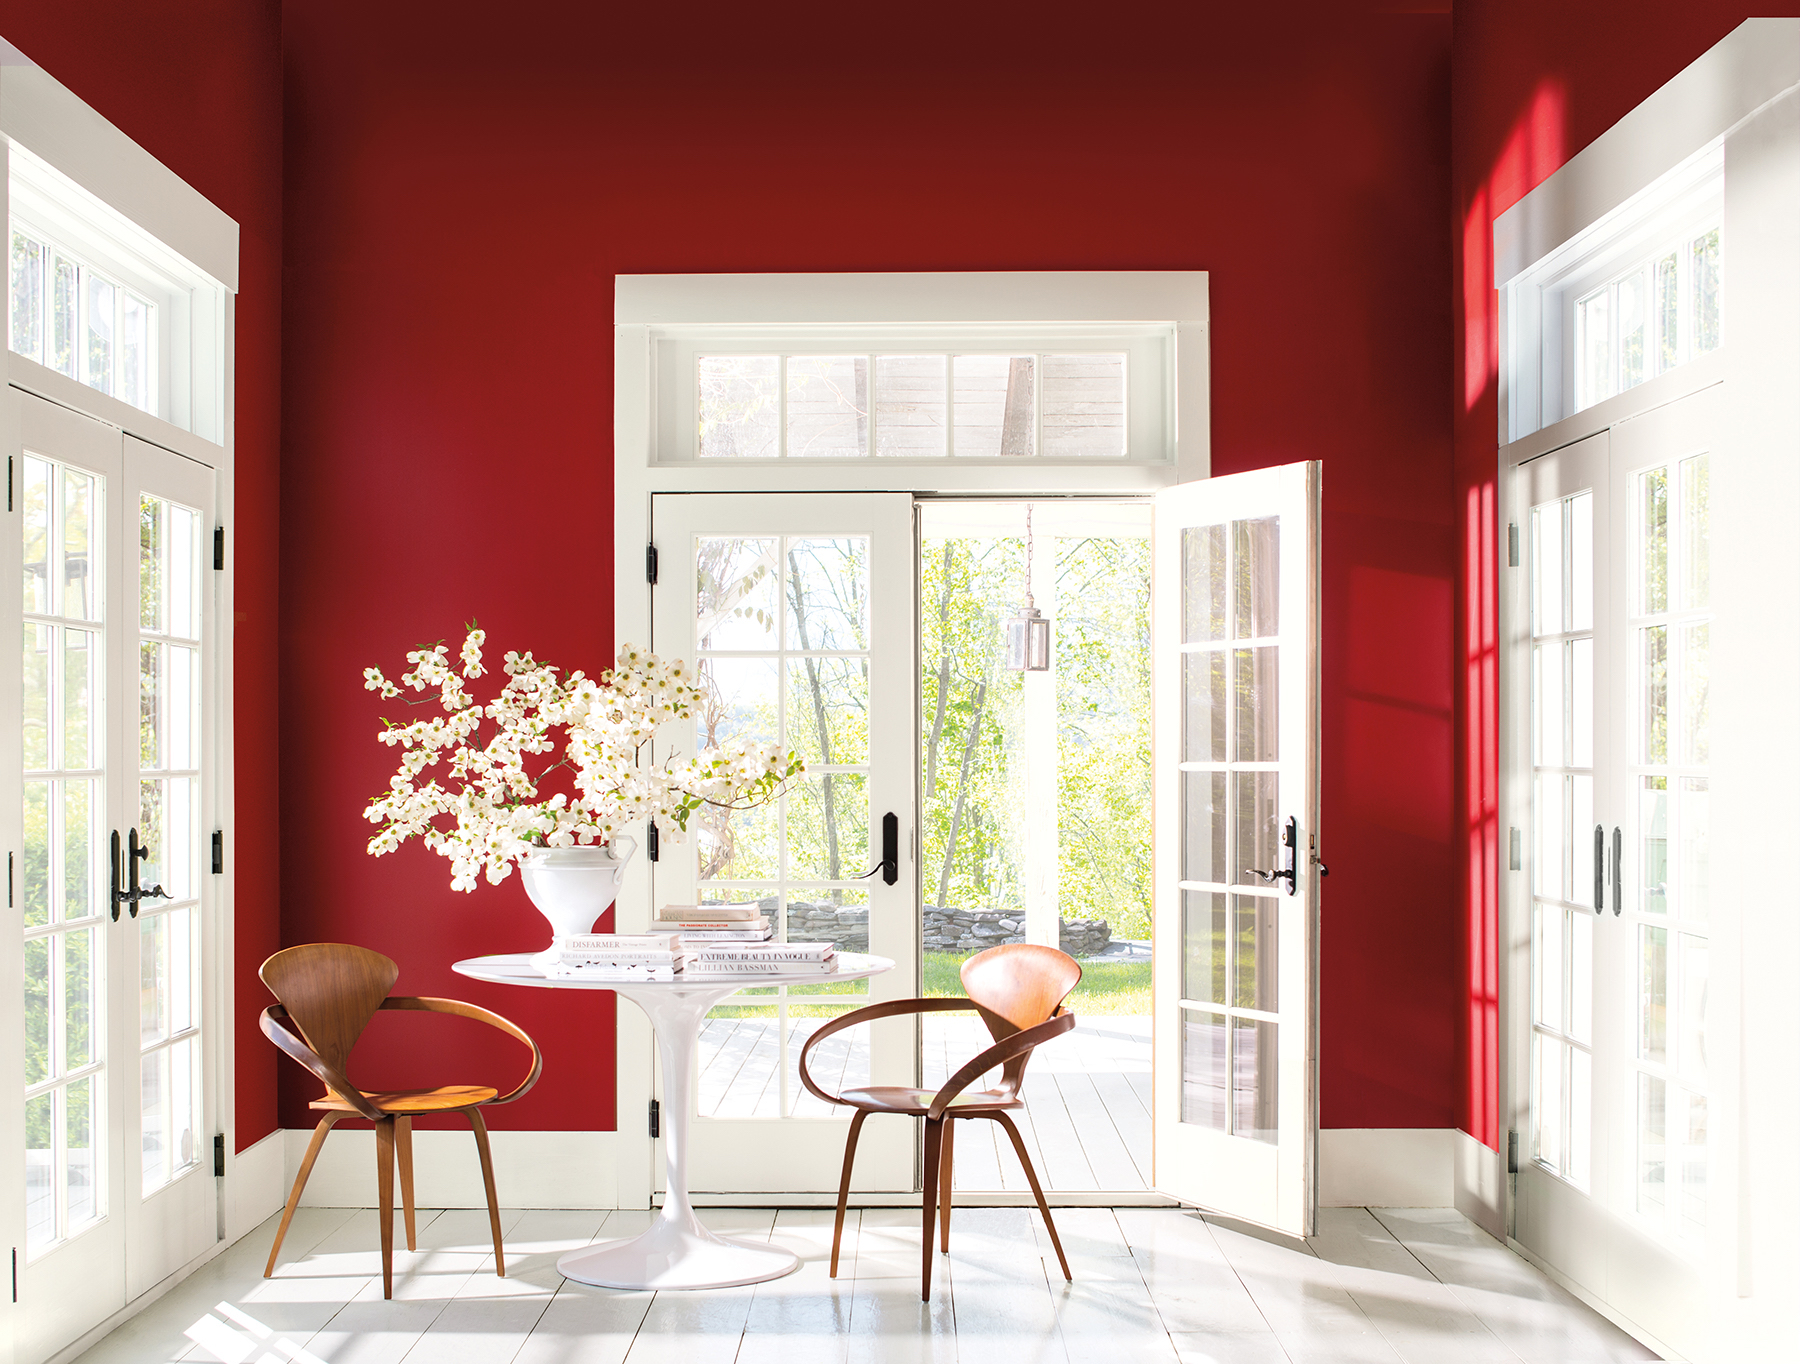 A red wall in Benjamin Moore's Eggshell Caliente AF290